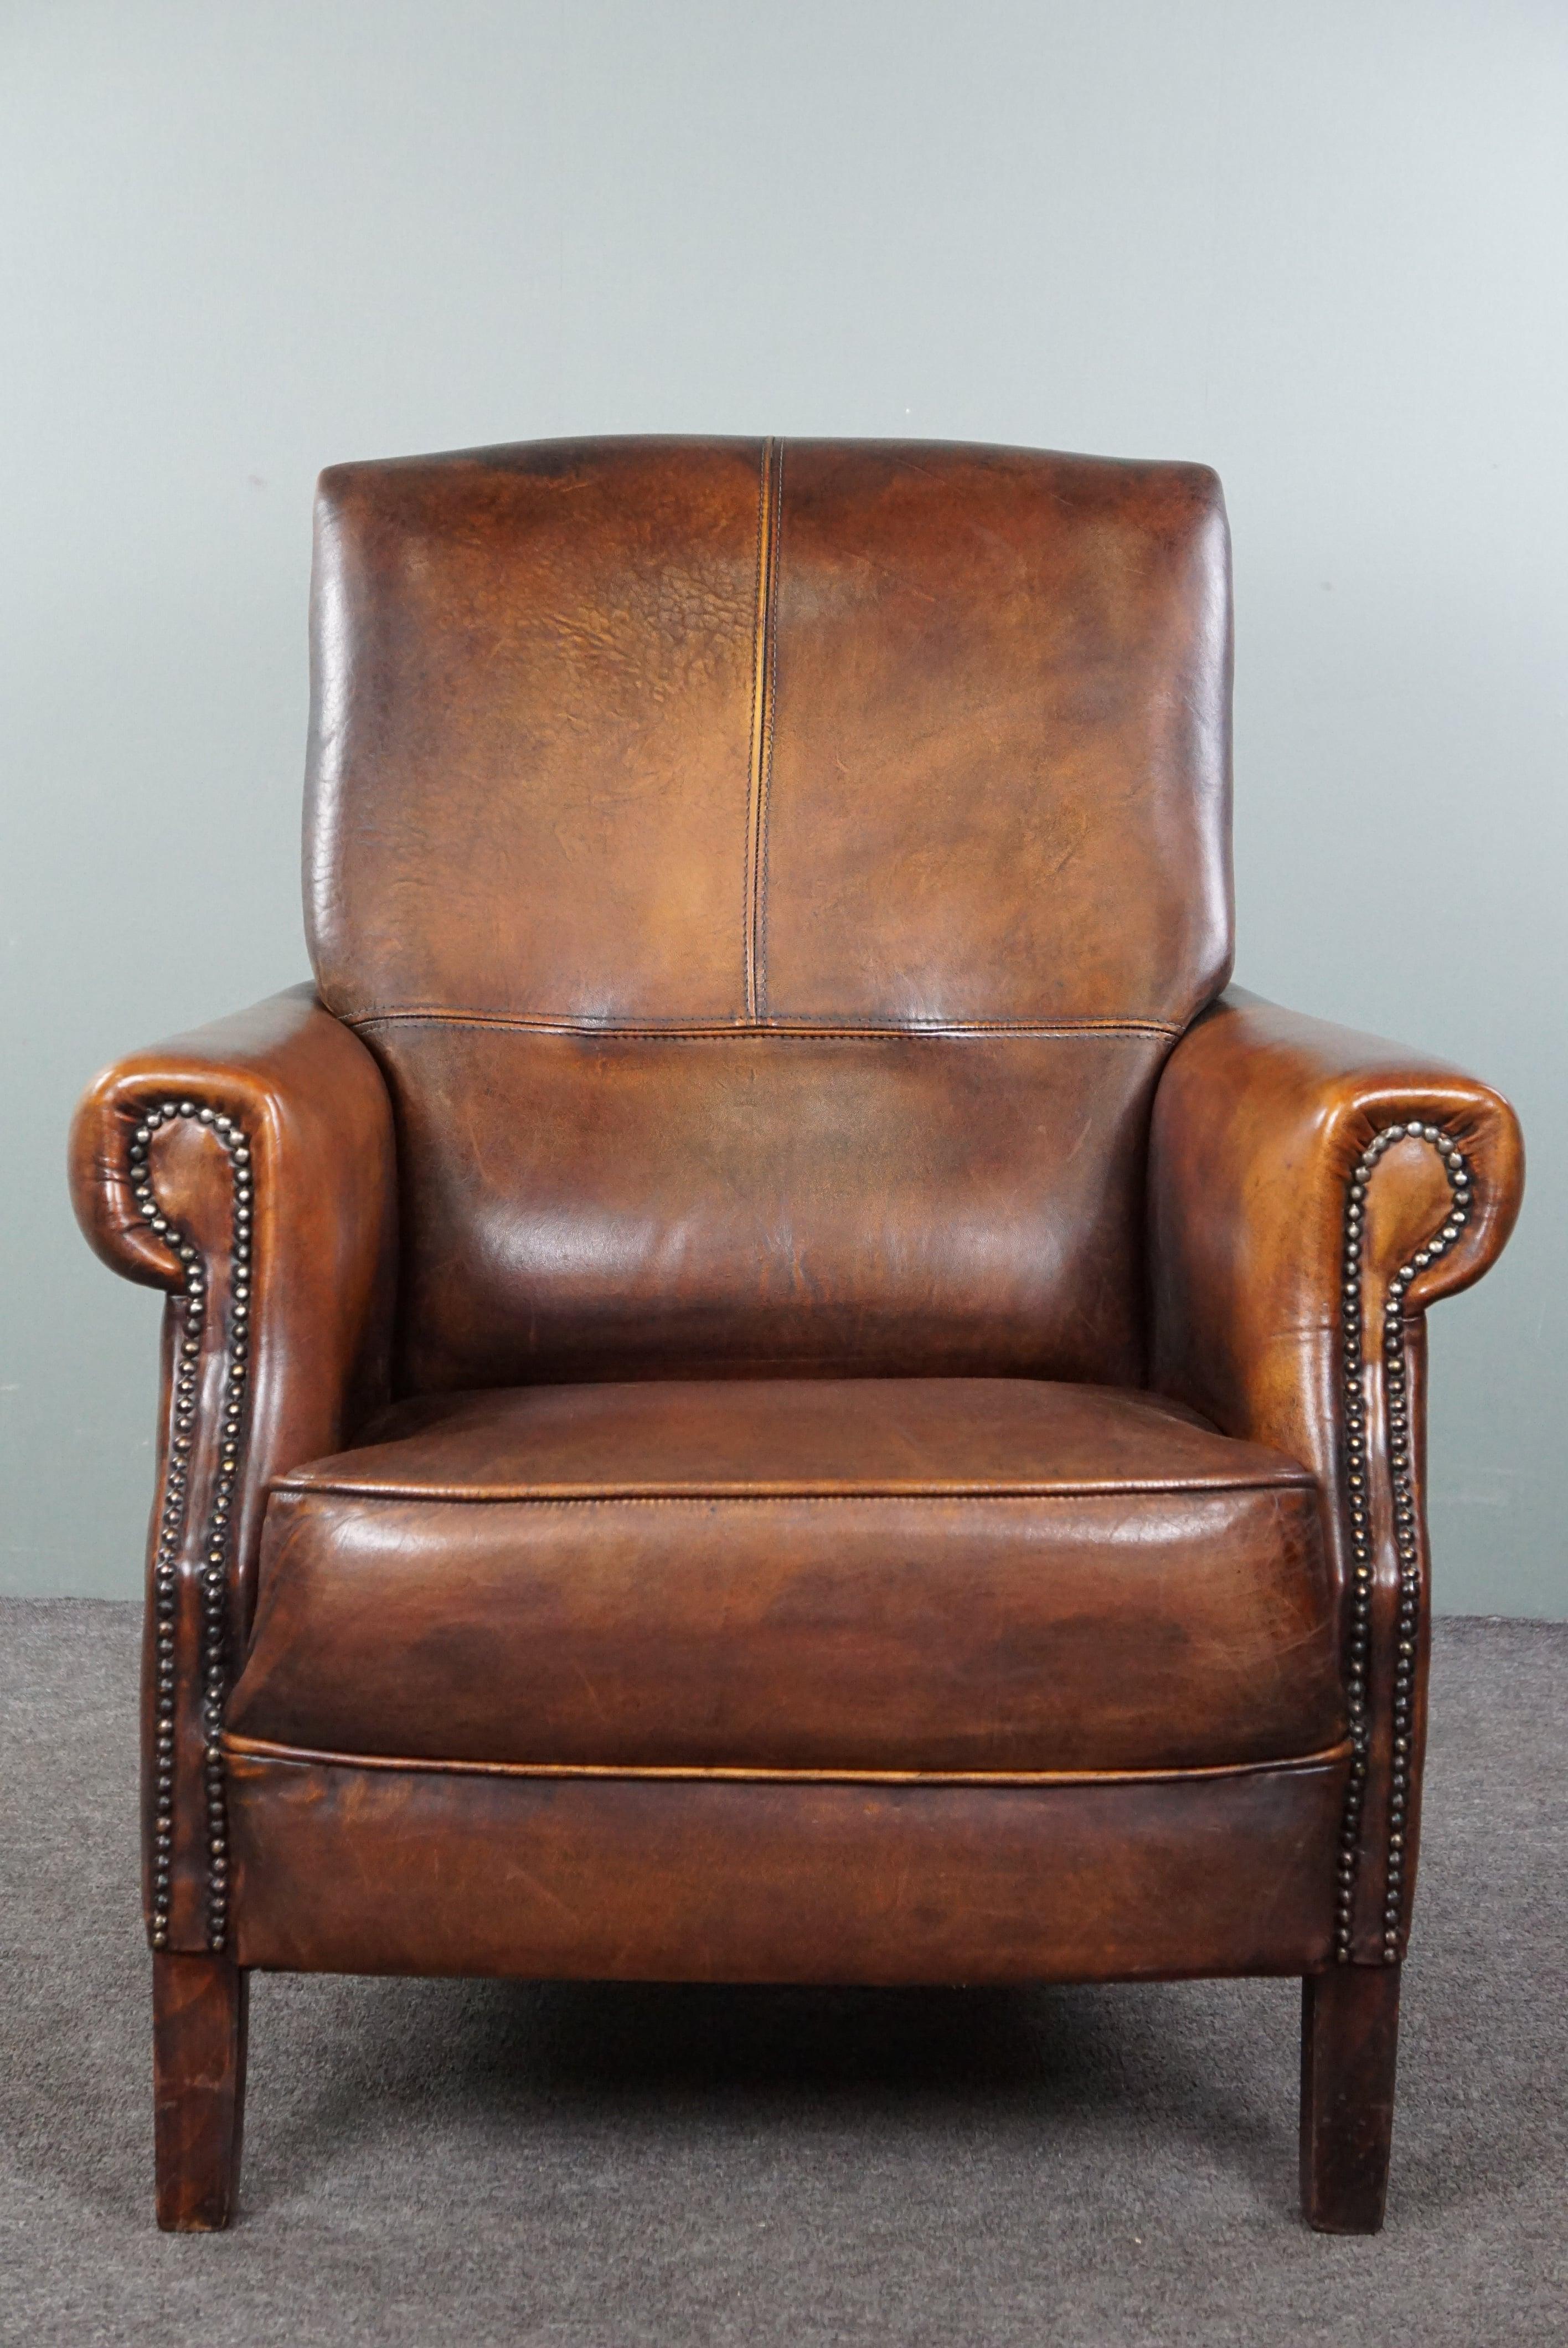 Offered is this beautiful sheep leather armchair with a fantastic appearance. This lovely armchair, in good condition, not only boasts stunning colors but also offers a delightfully comfortable seat. With its classic nail finish, this dignified